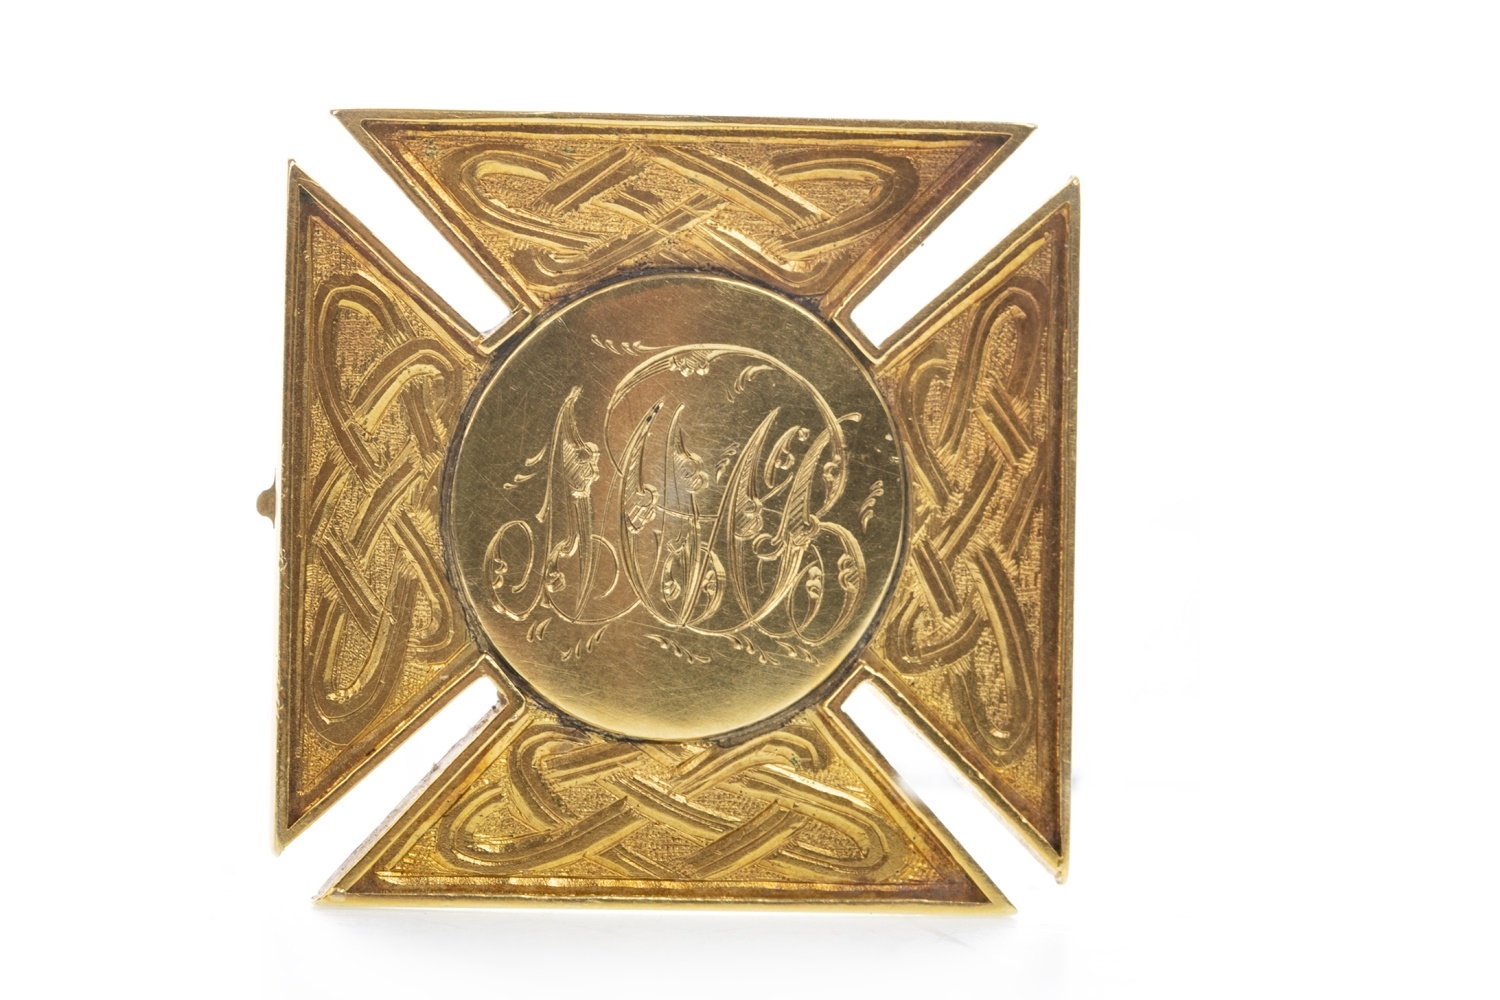 A VICTORIAN GOLD PLATED MEDAL WON BY J. MCBRIDE